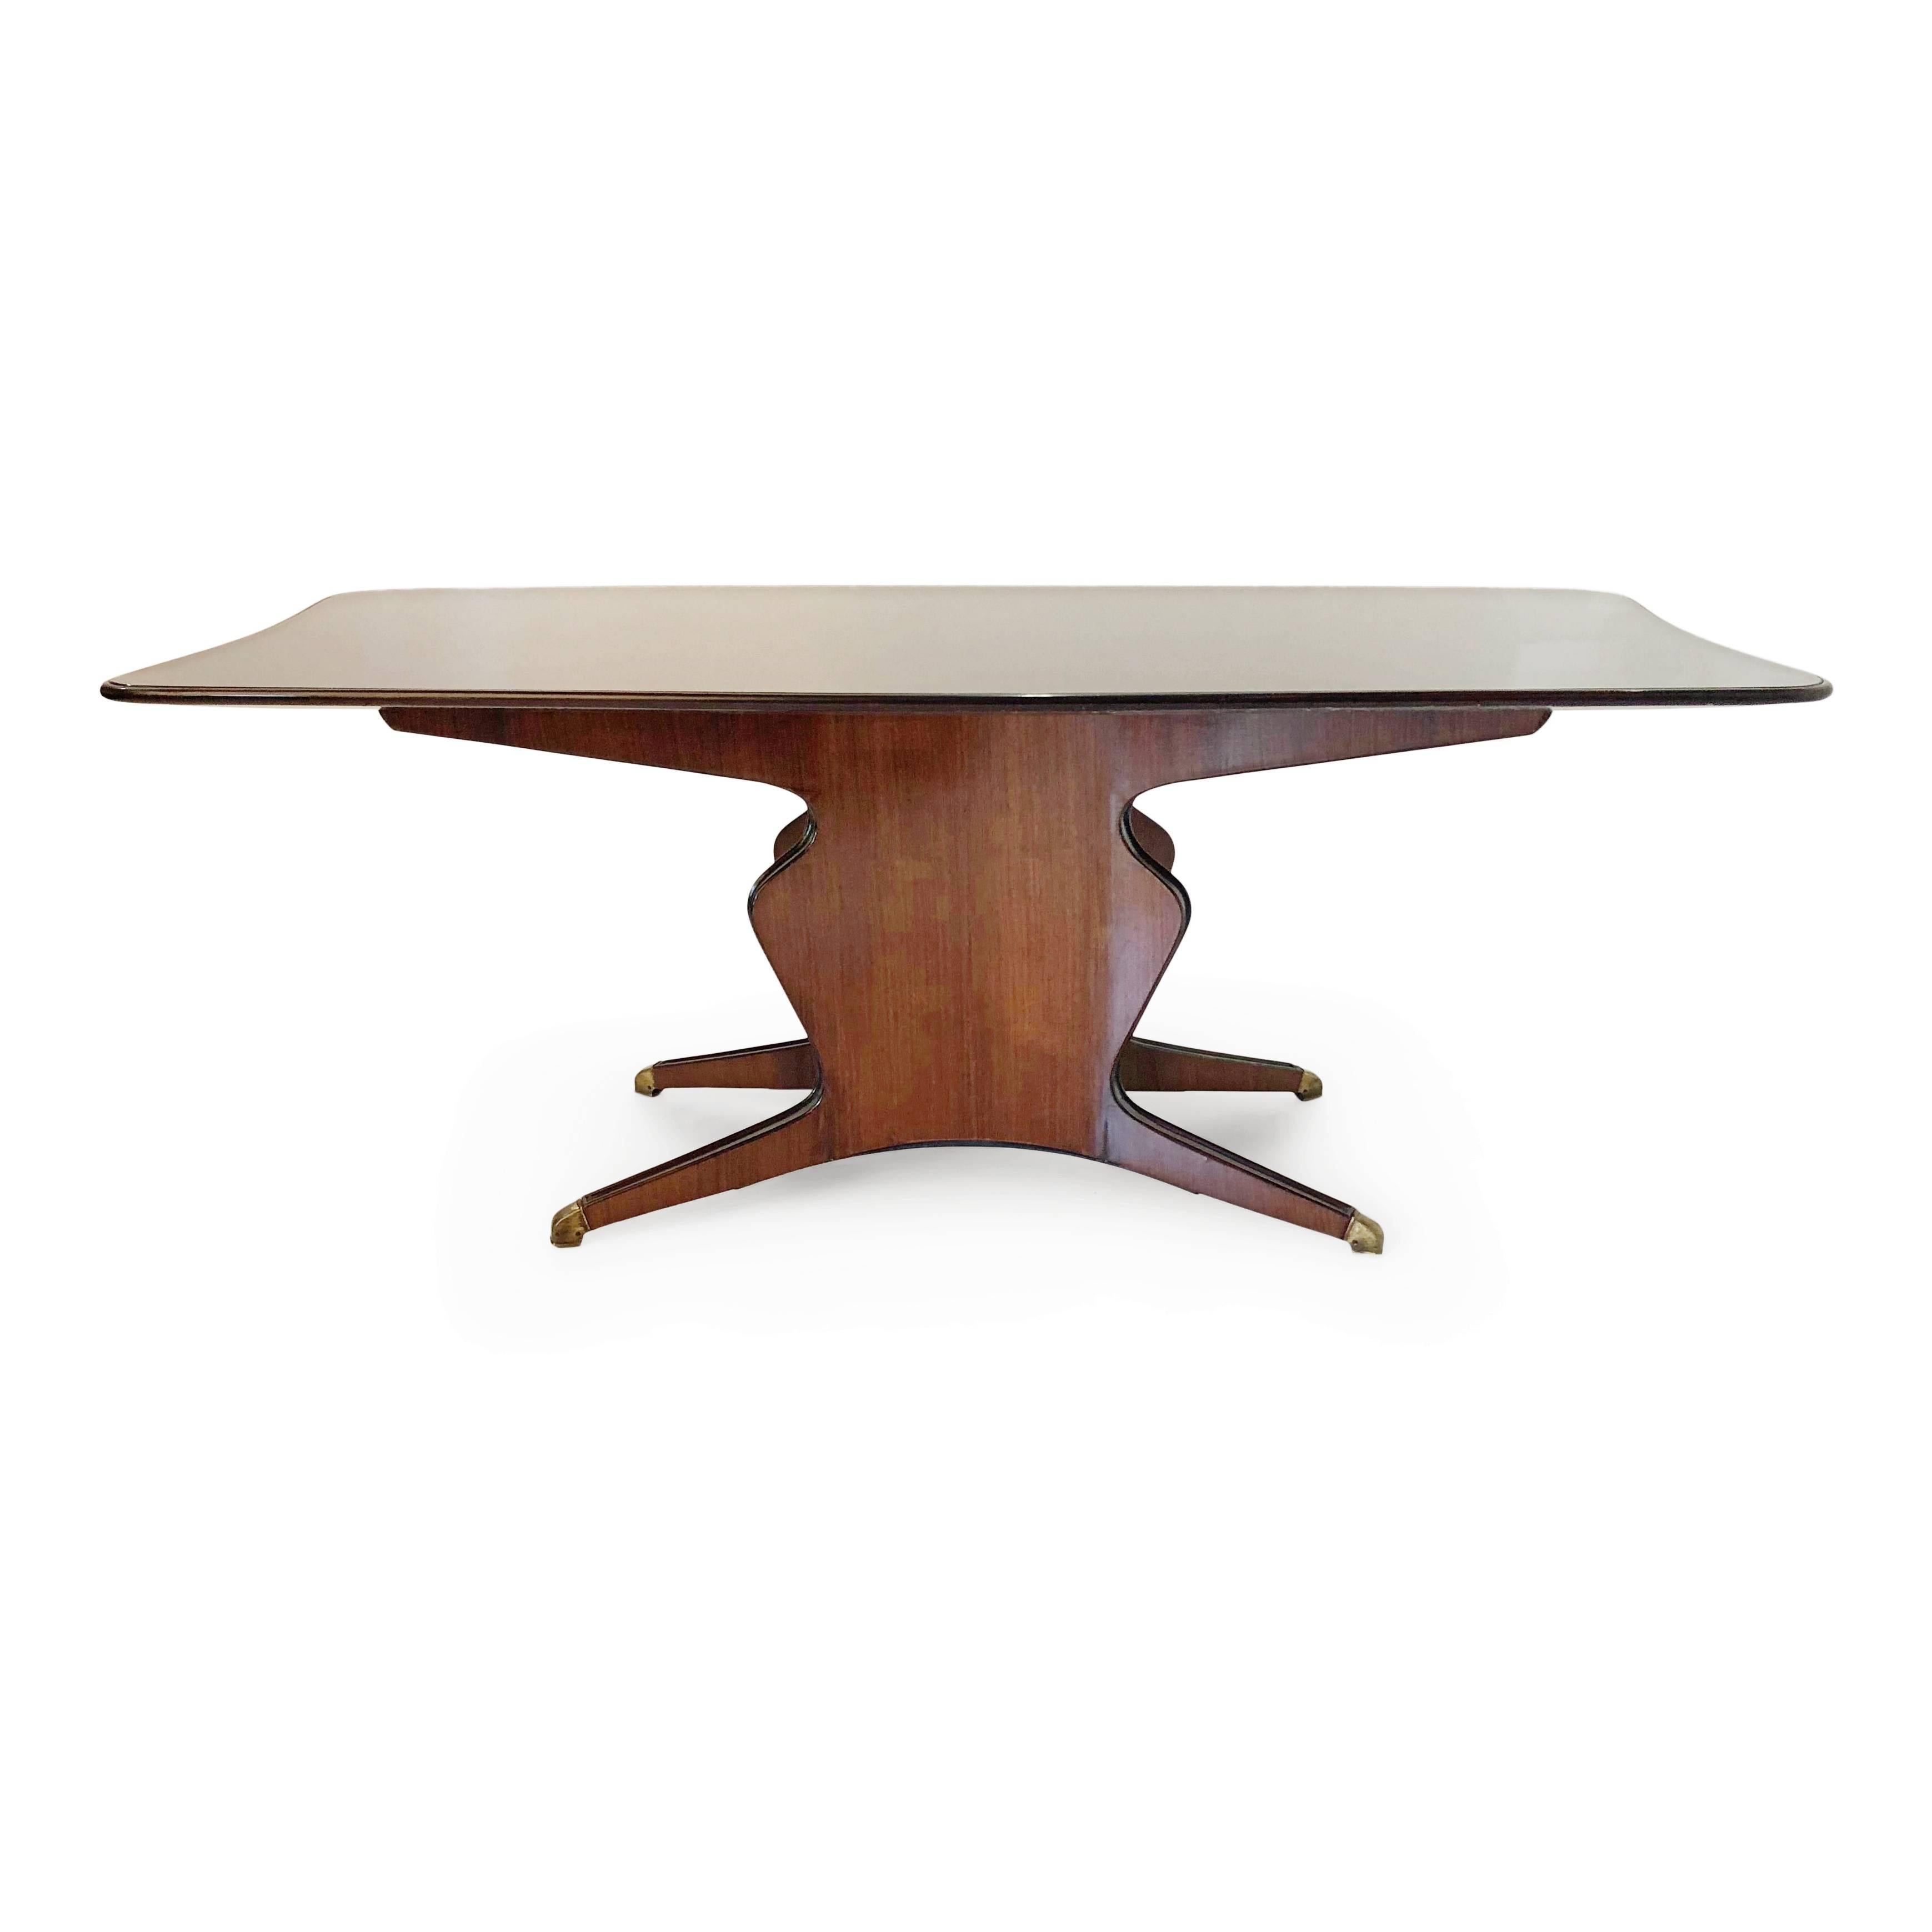 Expansive Italian dining table in the style of Osvaldo Borsani. This handsome table is fabricated from a beautiful bold-grained rosewood with sculptural base and brass sabots. The broad top has a dark colored glass surface which reflects the light.